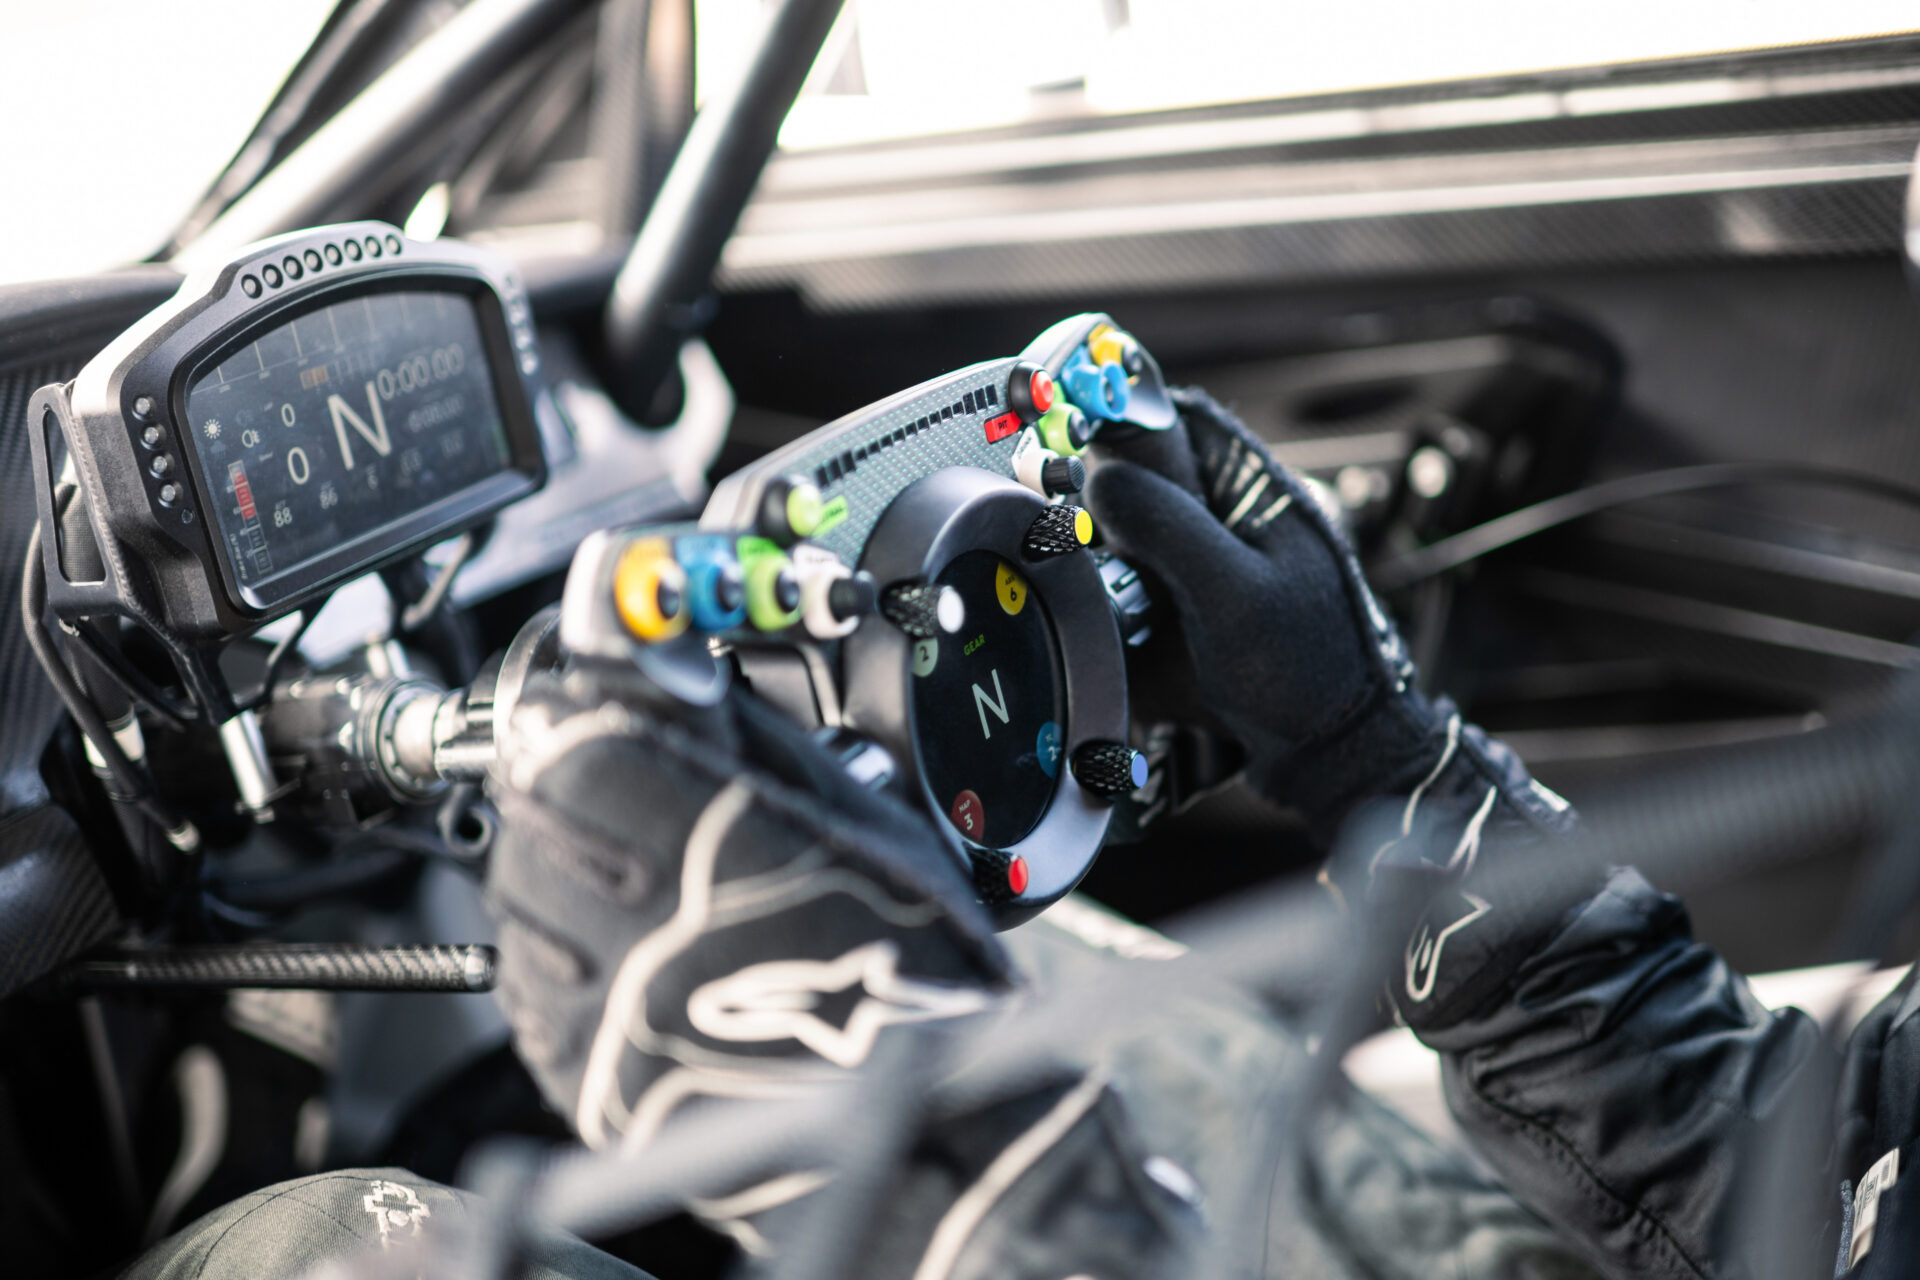 Fanatec Bentley Wheel Will Drive Up Pikes Peak Then Mount to Your Sim Rig –  GTPlanet